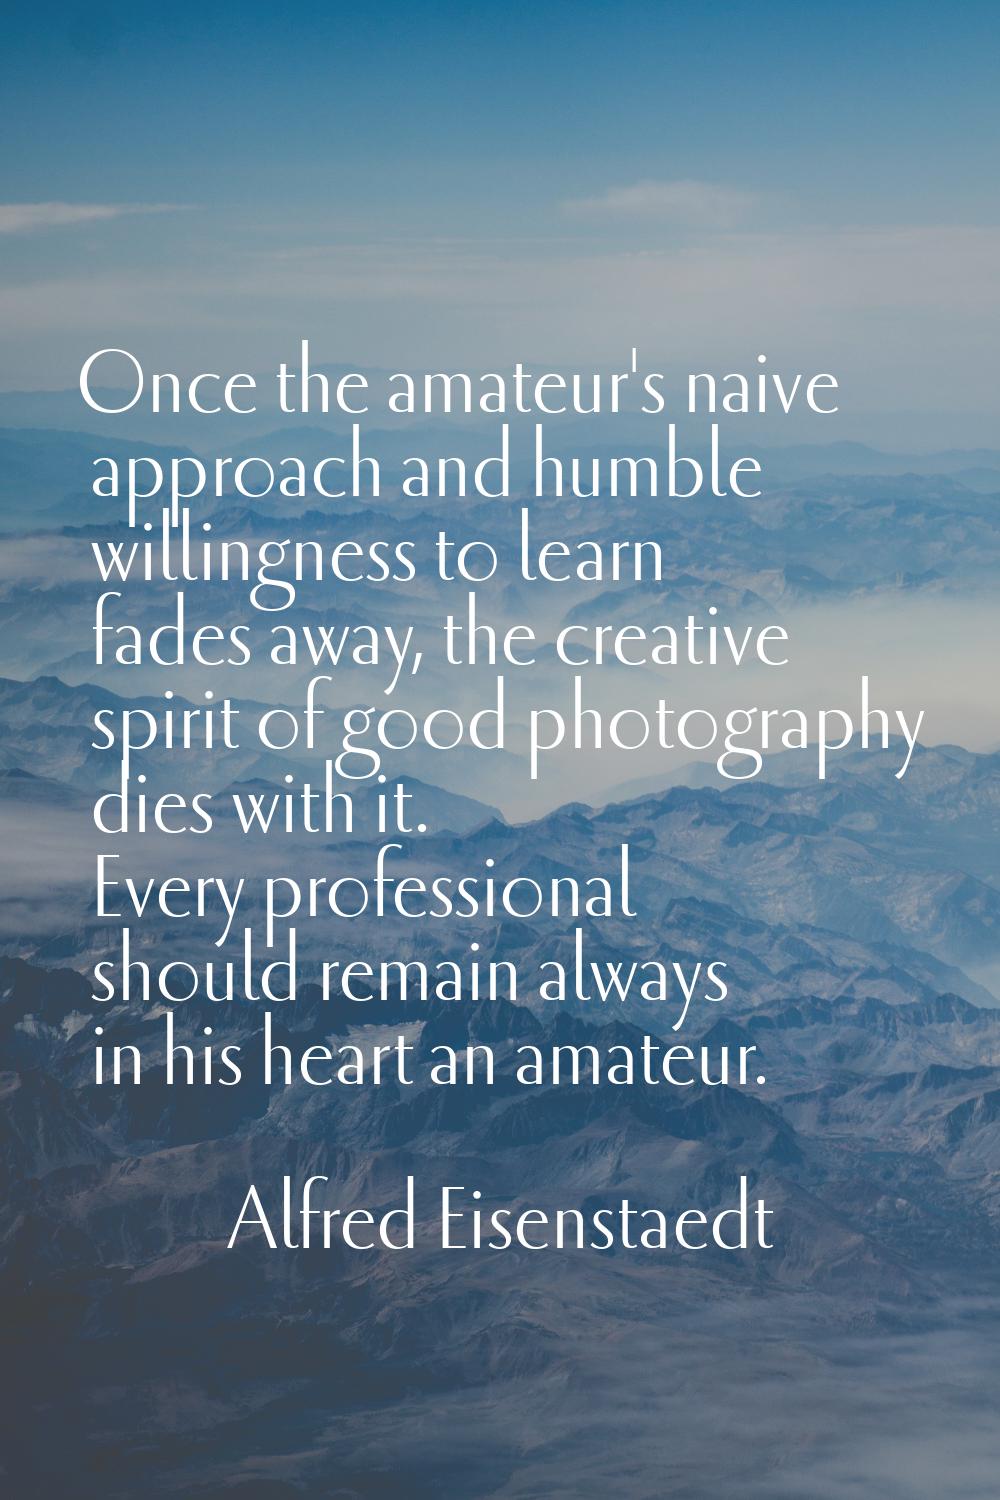 Once the amateur's naive approach and humble willingness to learn fades away, the creative spirit o